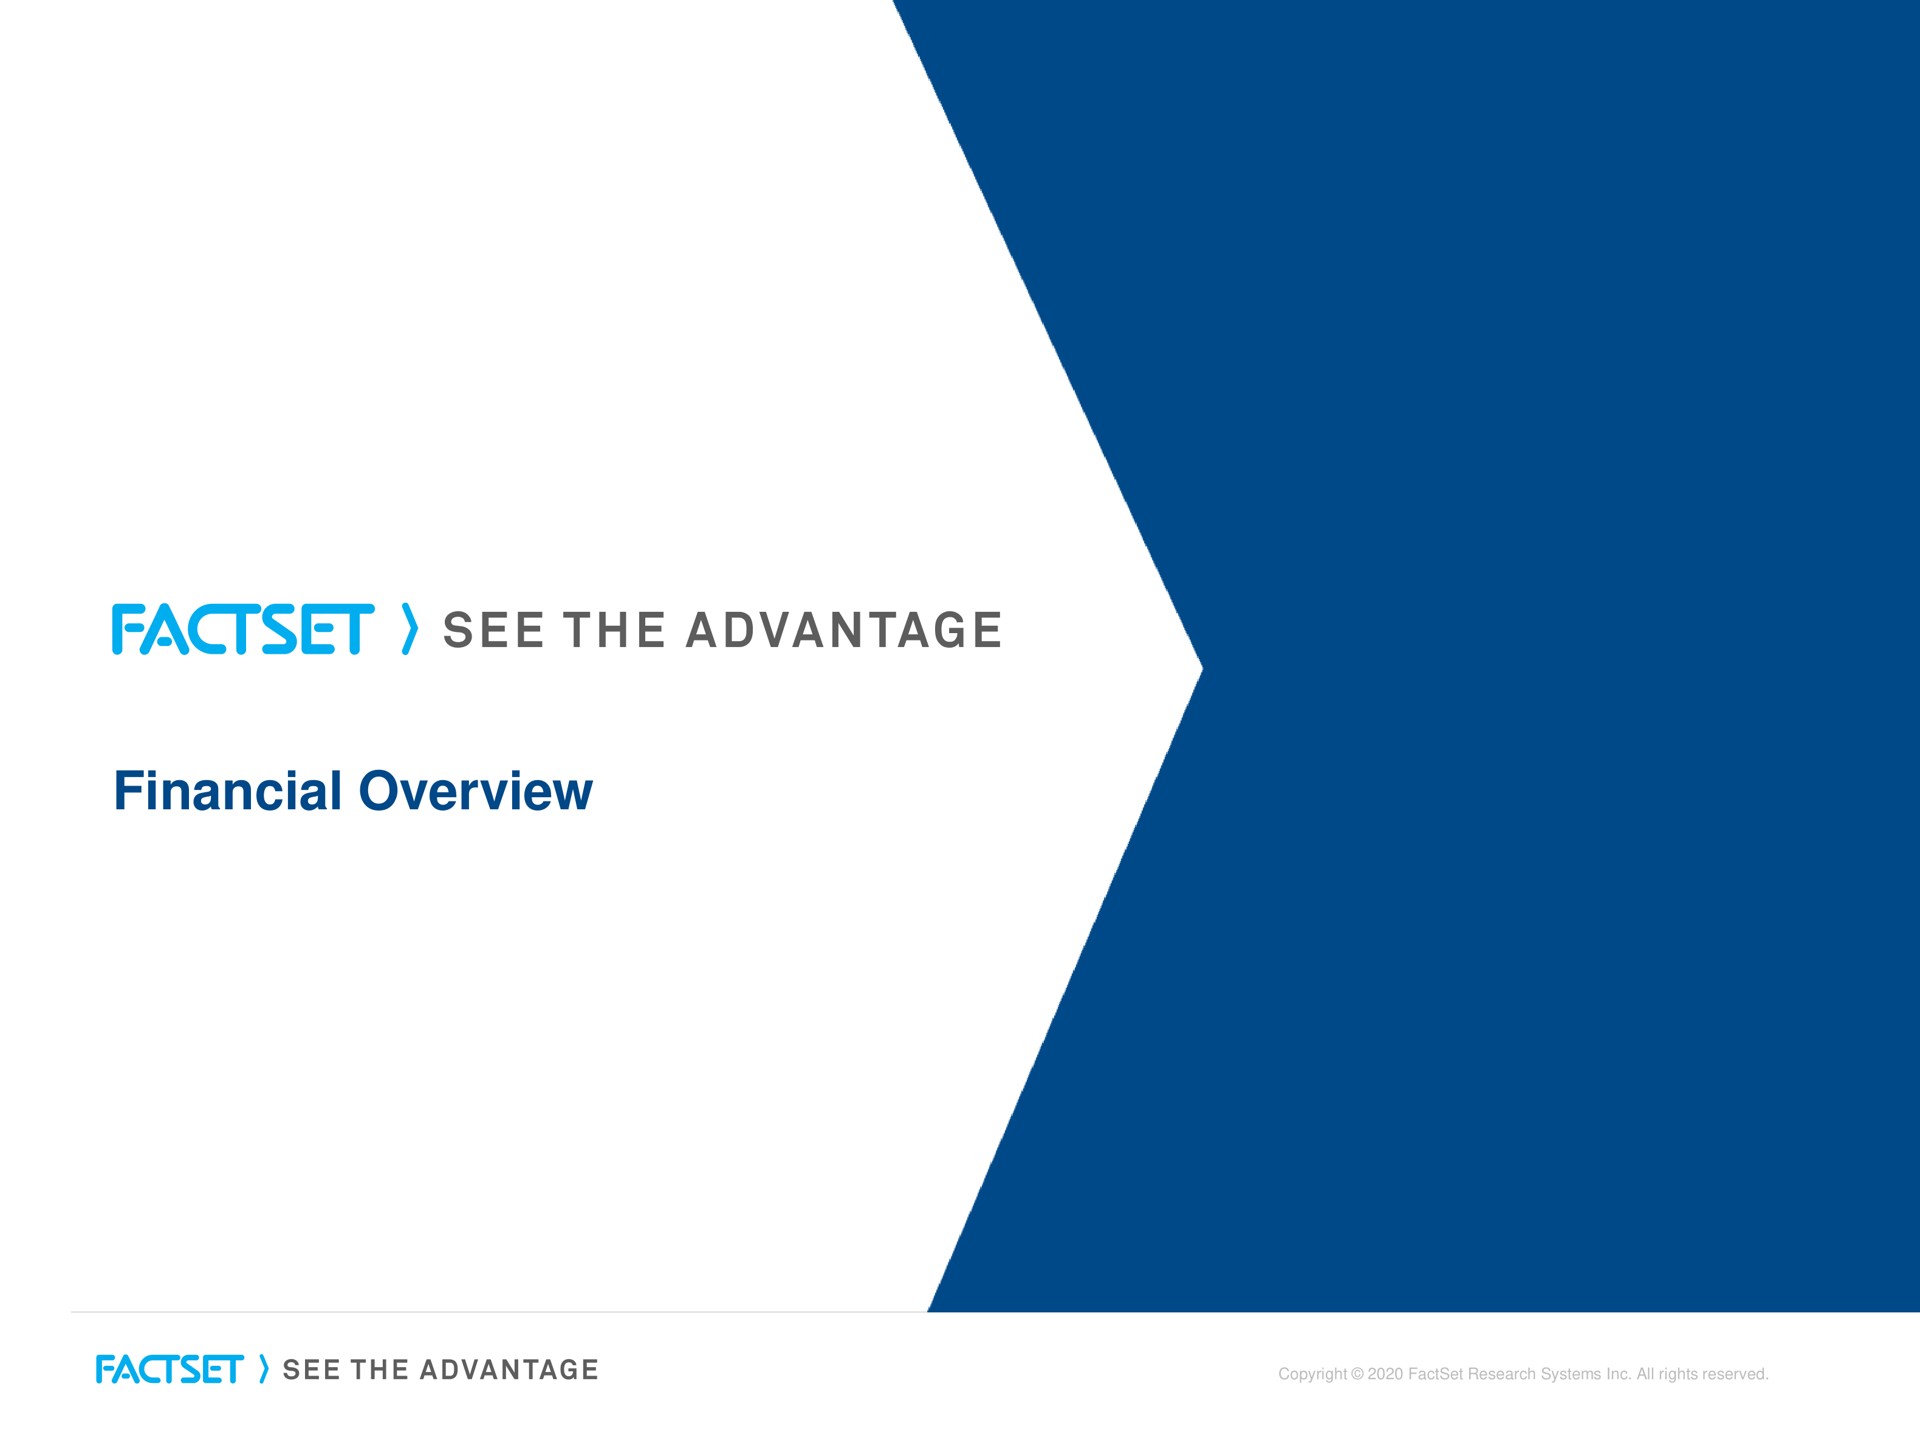 financial overview see the advantage | Factset